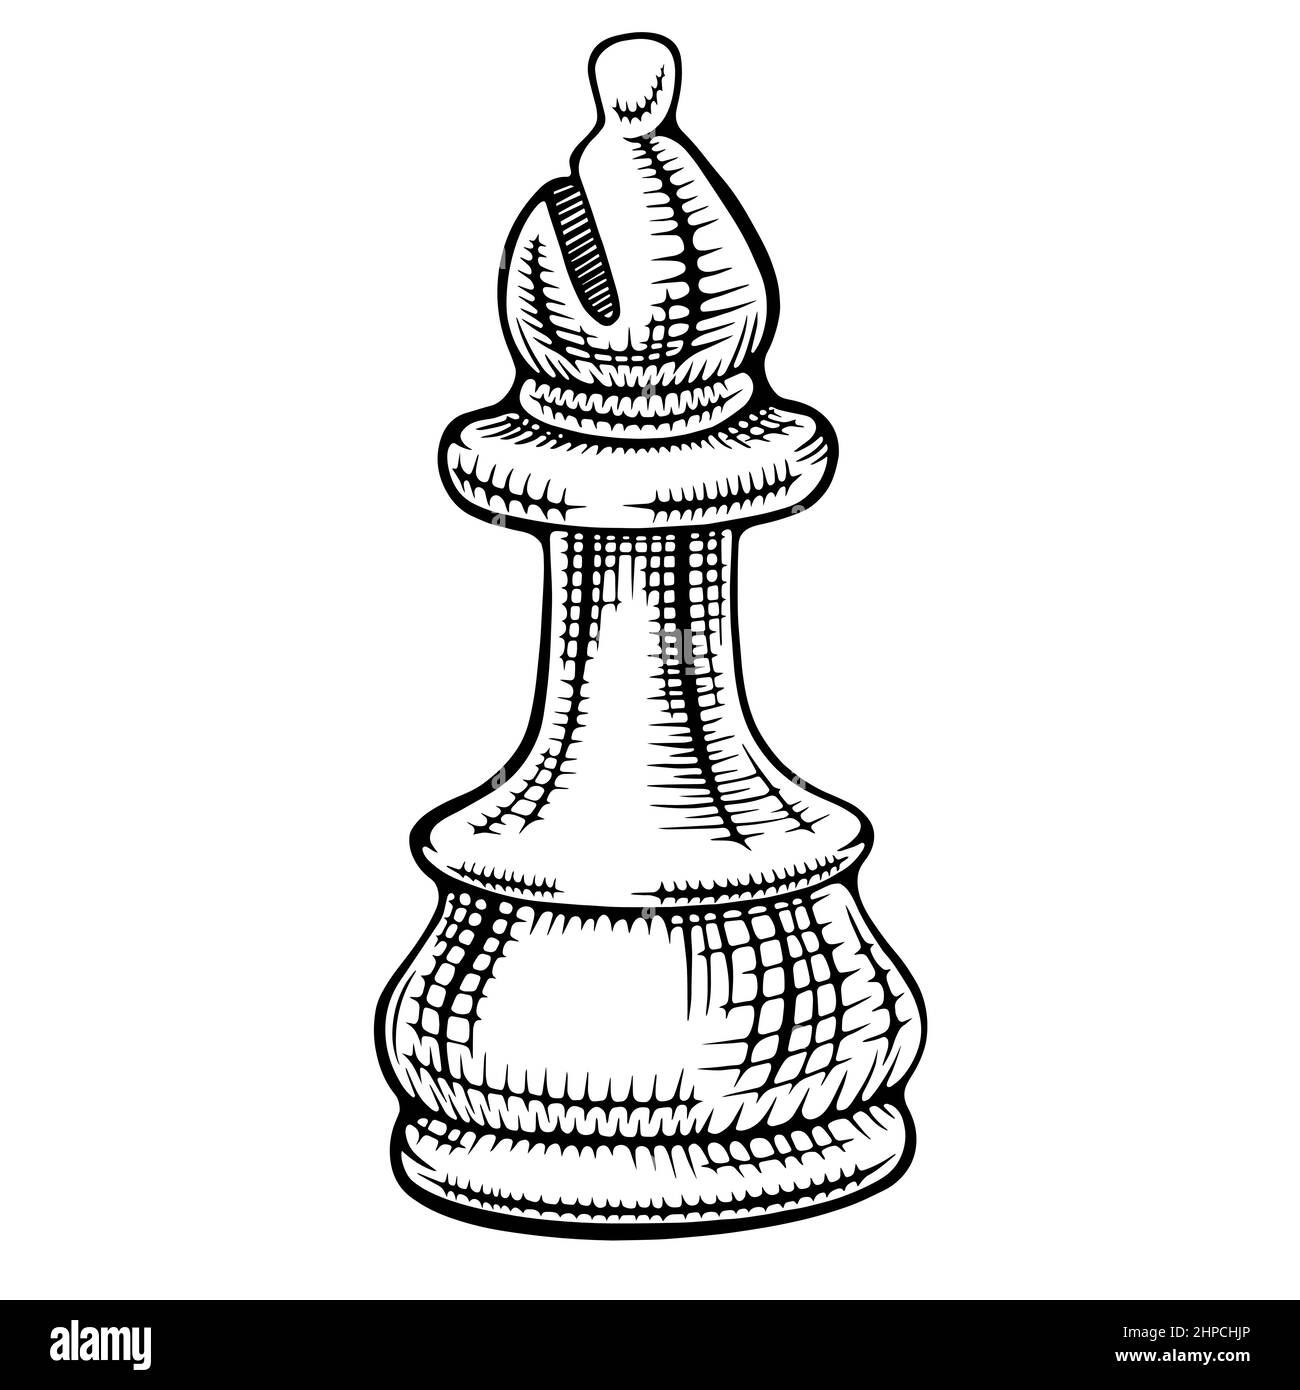 Hand drawn bishop. Vintage chess piece isolated on white background ...